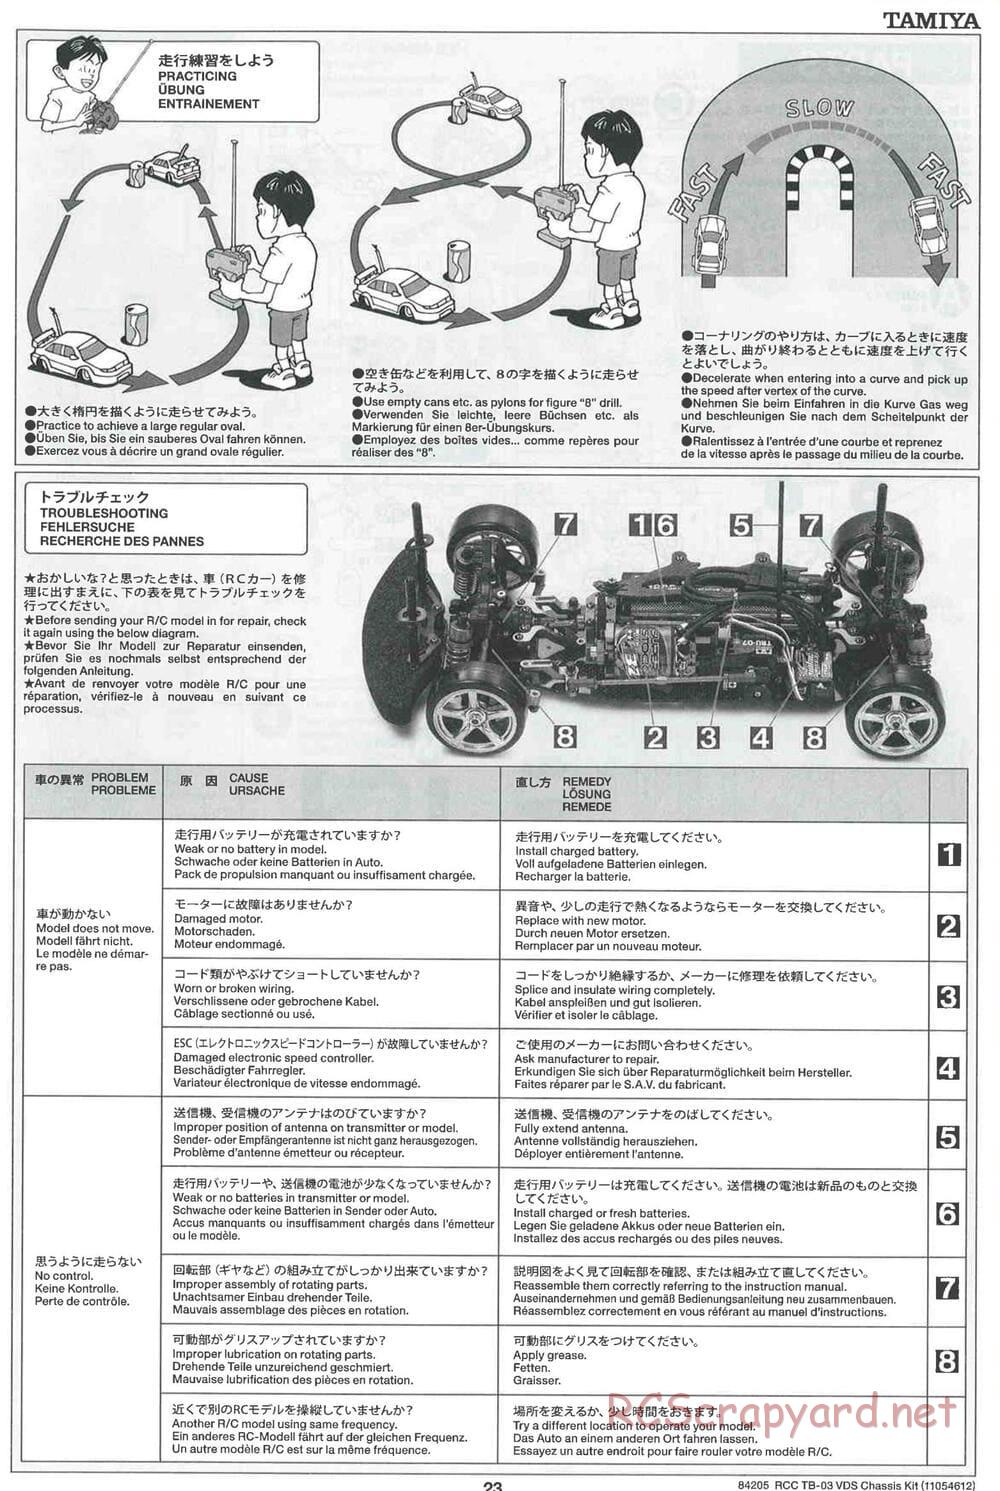 Tamiya - TB-03 VDS Drift Spec Chassis - Manual - Page 23